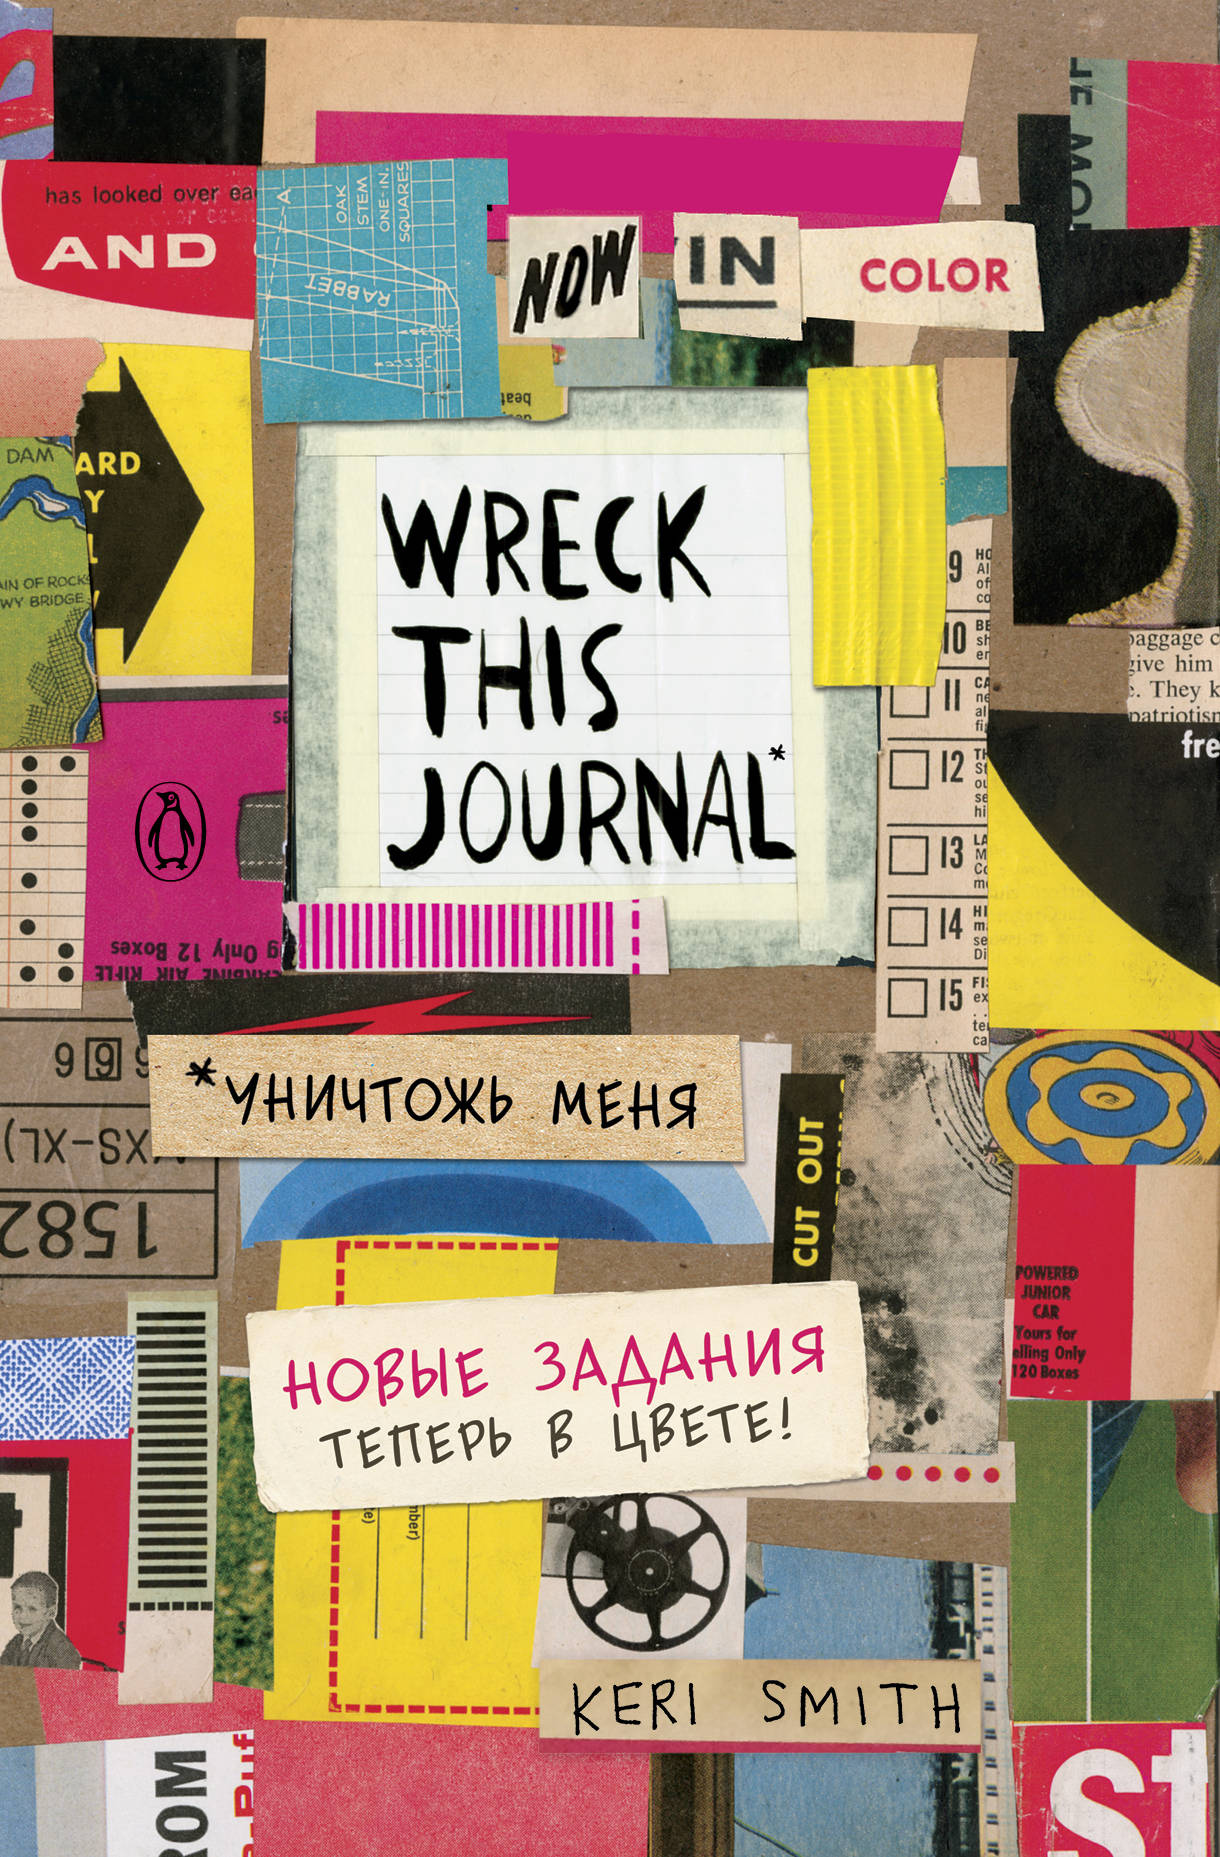   .     (.. Wreck this journal)